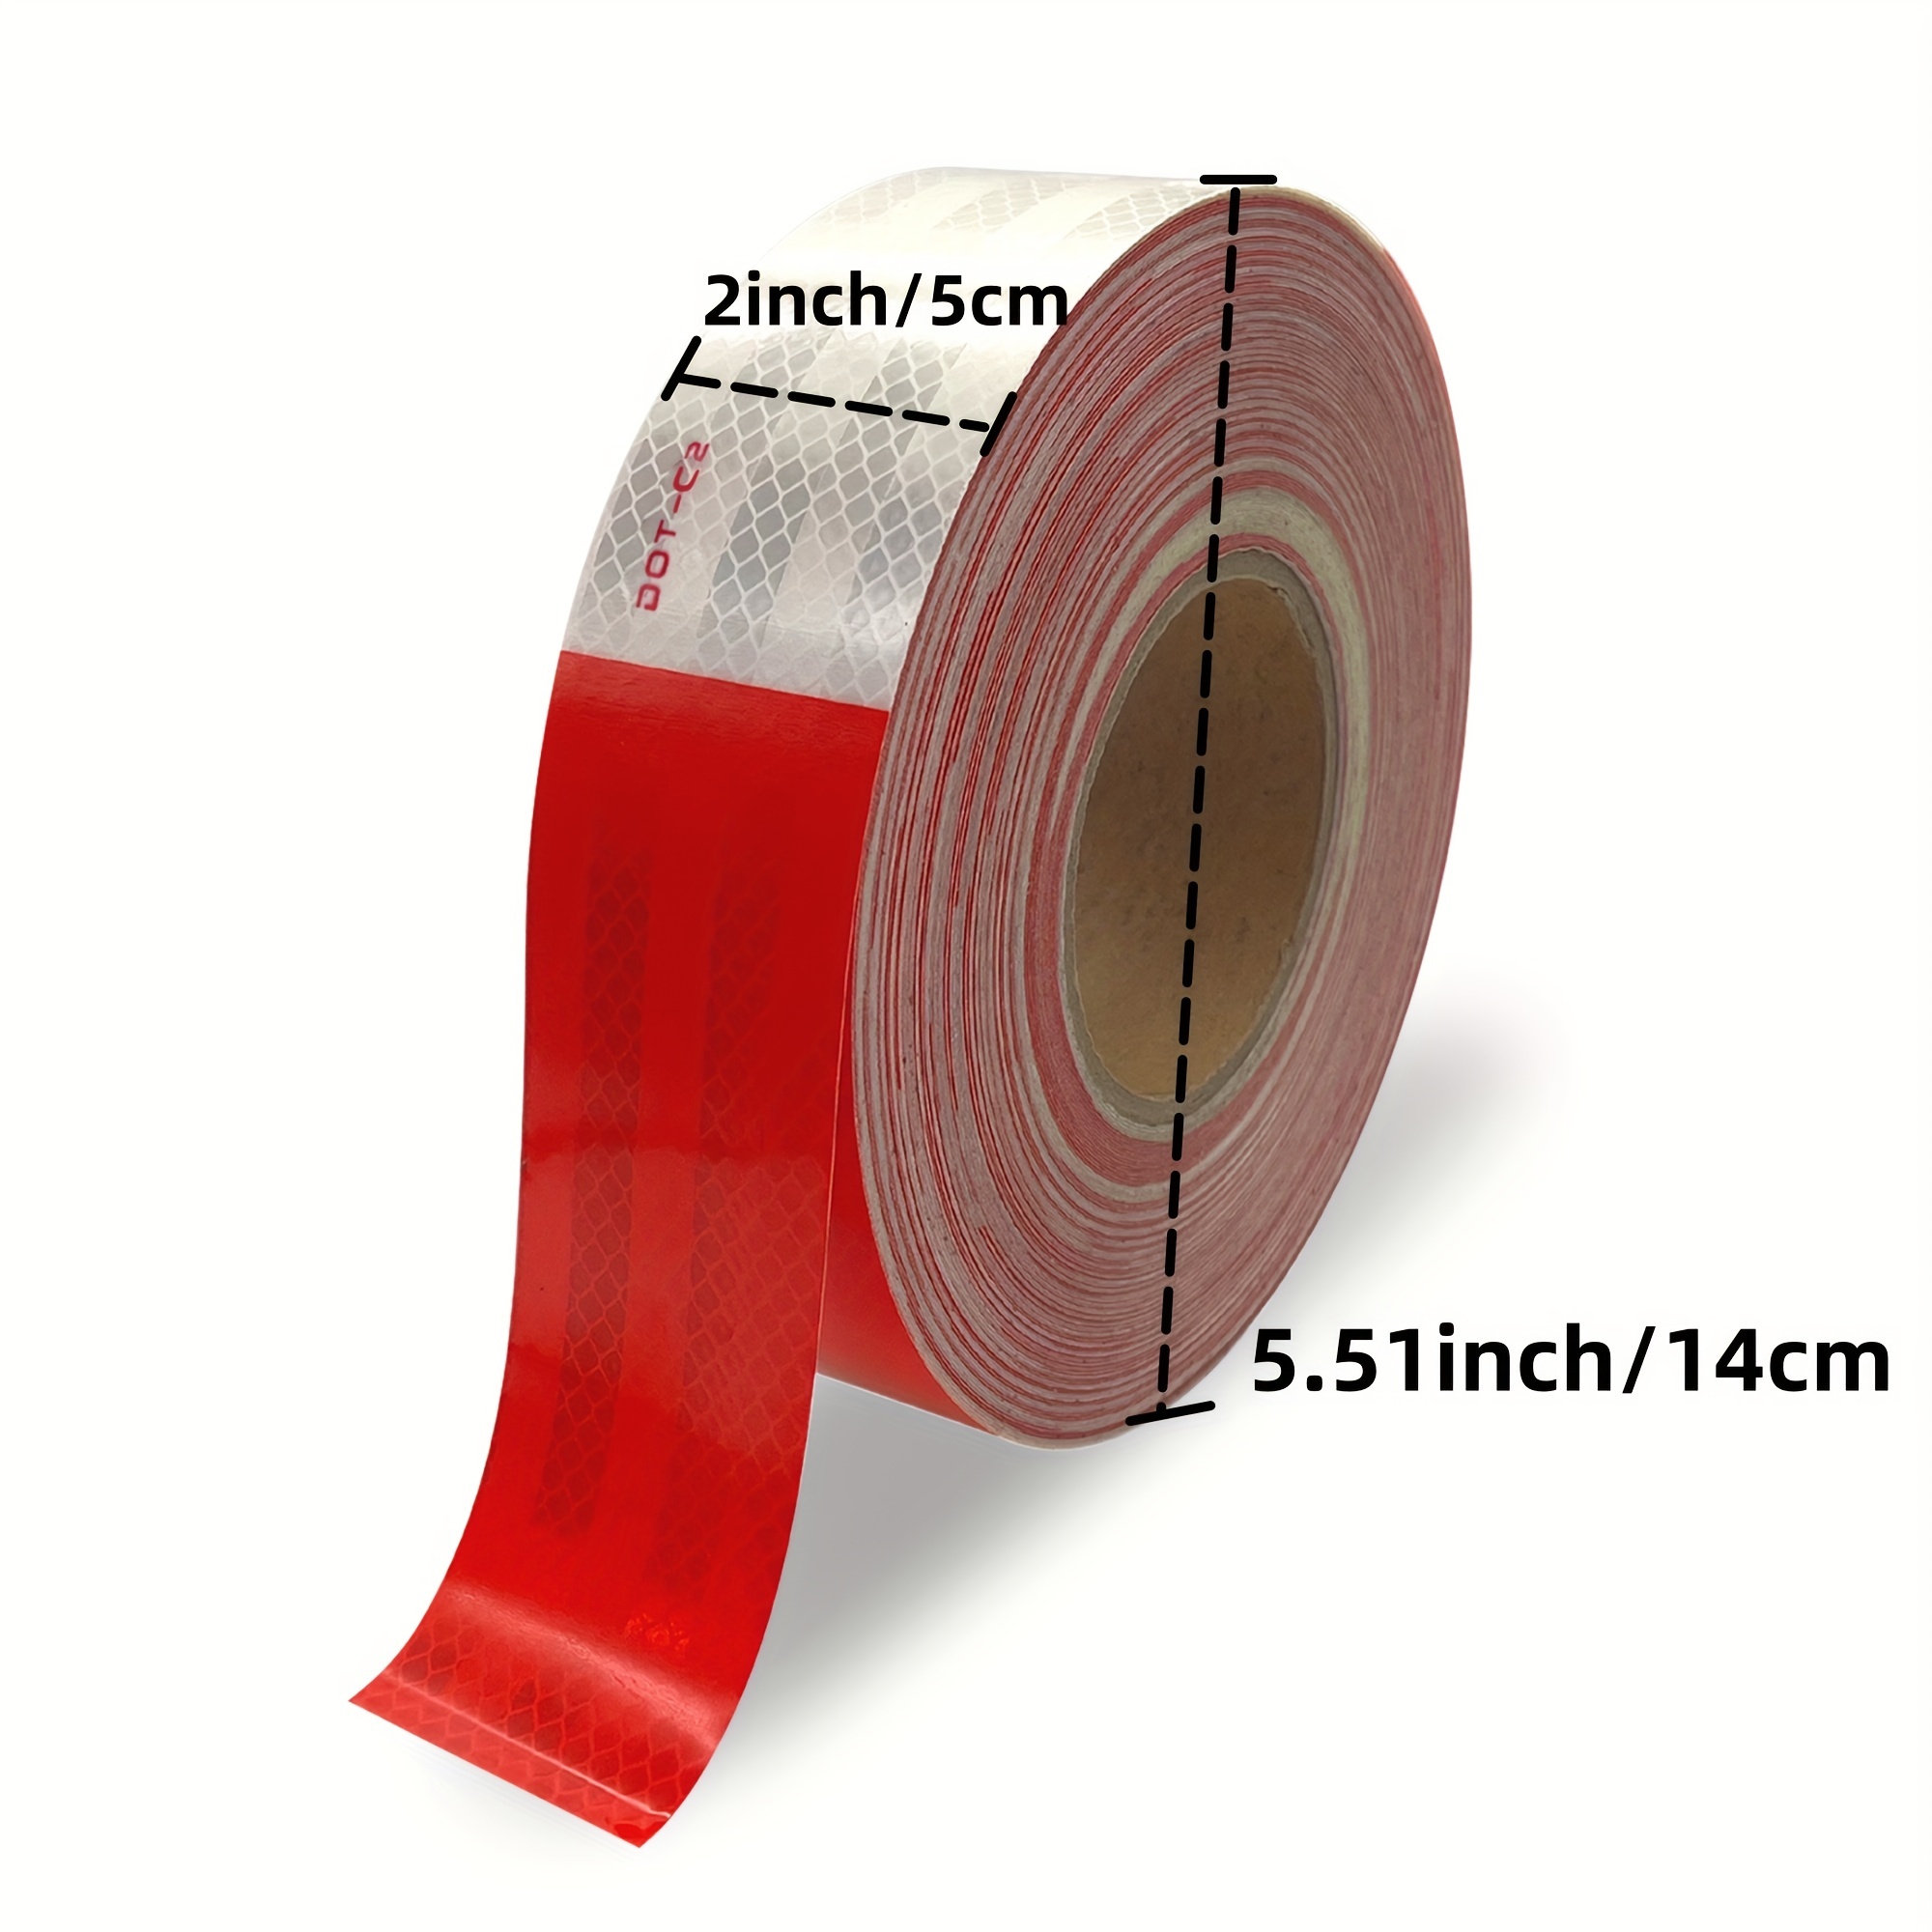 3M Self-adhesive Reflective Tape for Vehicles and Trailers, Cars